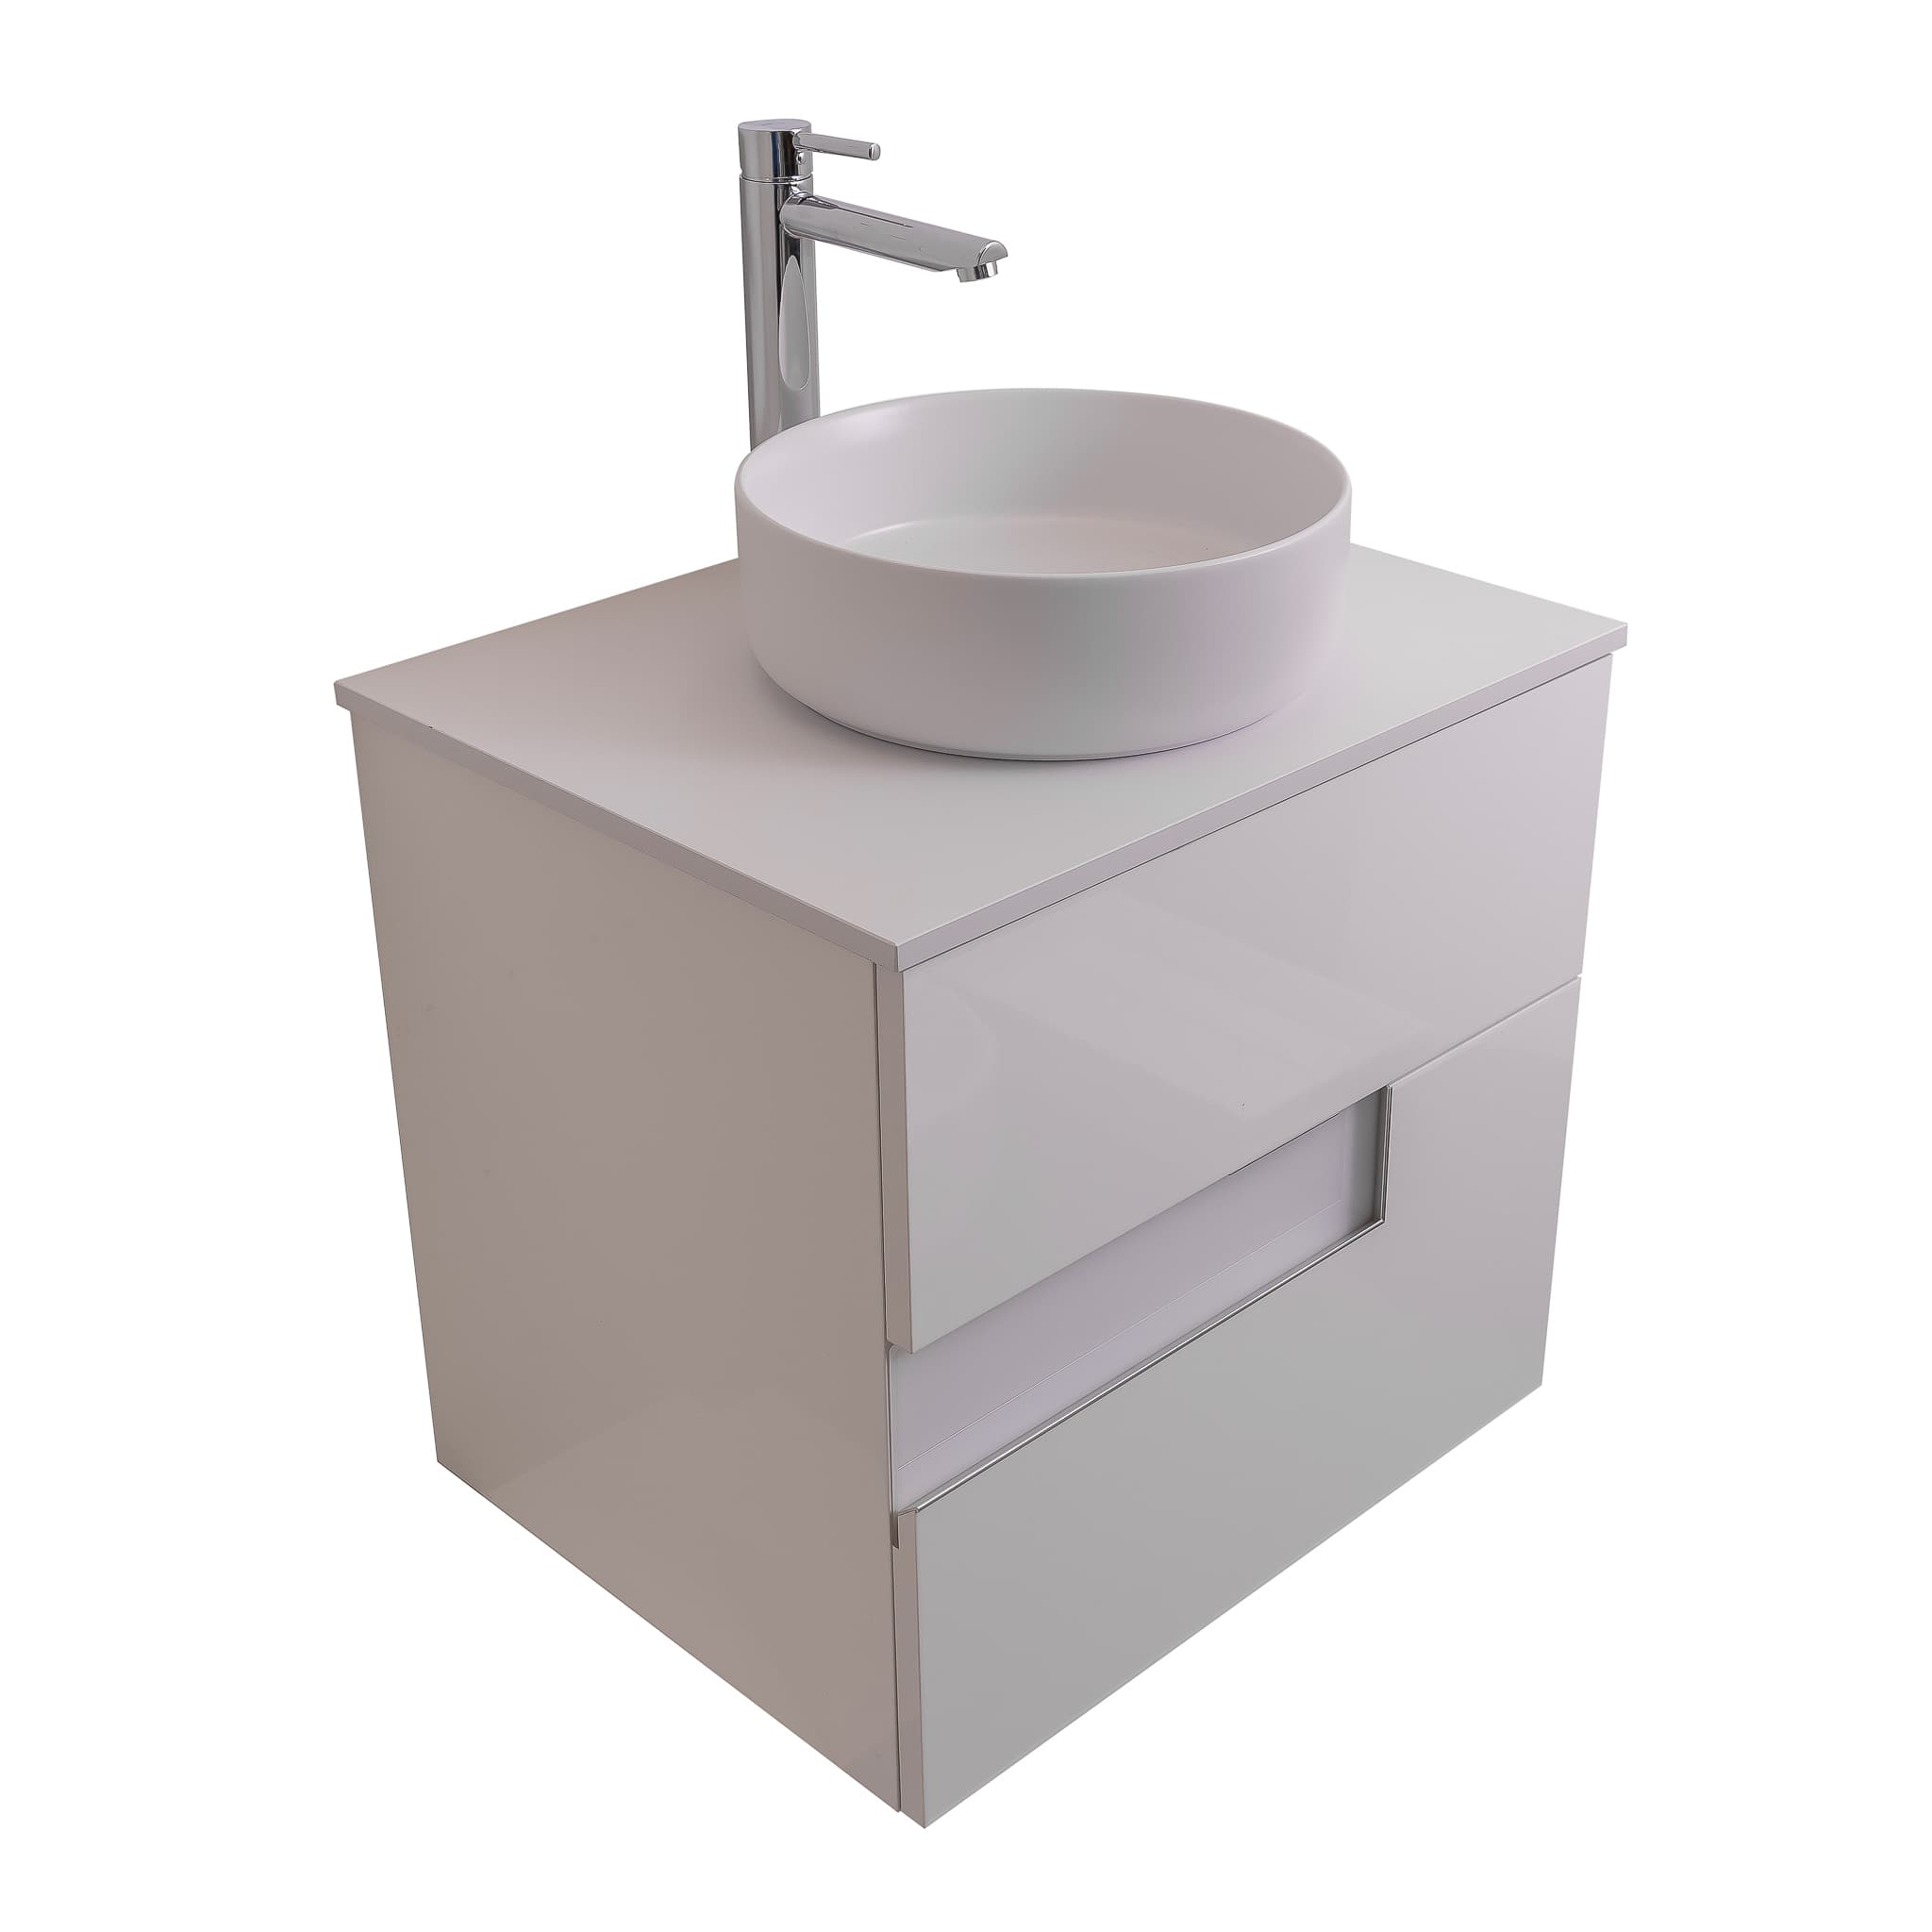 Vision 23.5 White High Gloss Cabinet, Ares White Top And Ares White Ceramic Basin, Wall Mounted Modern Vanity Set